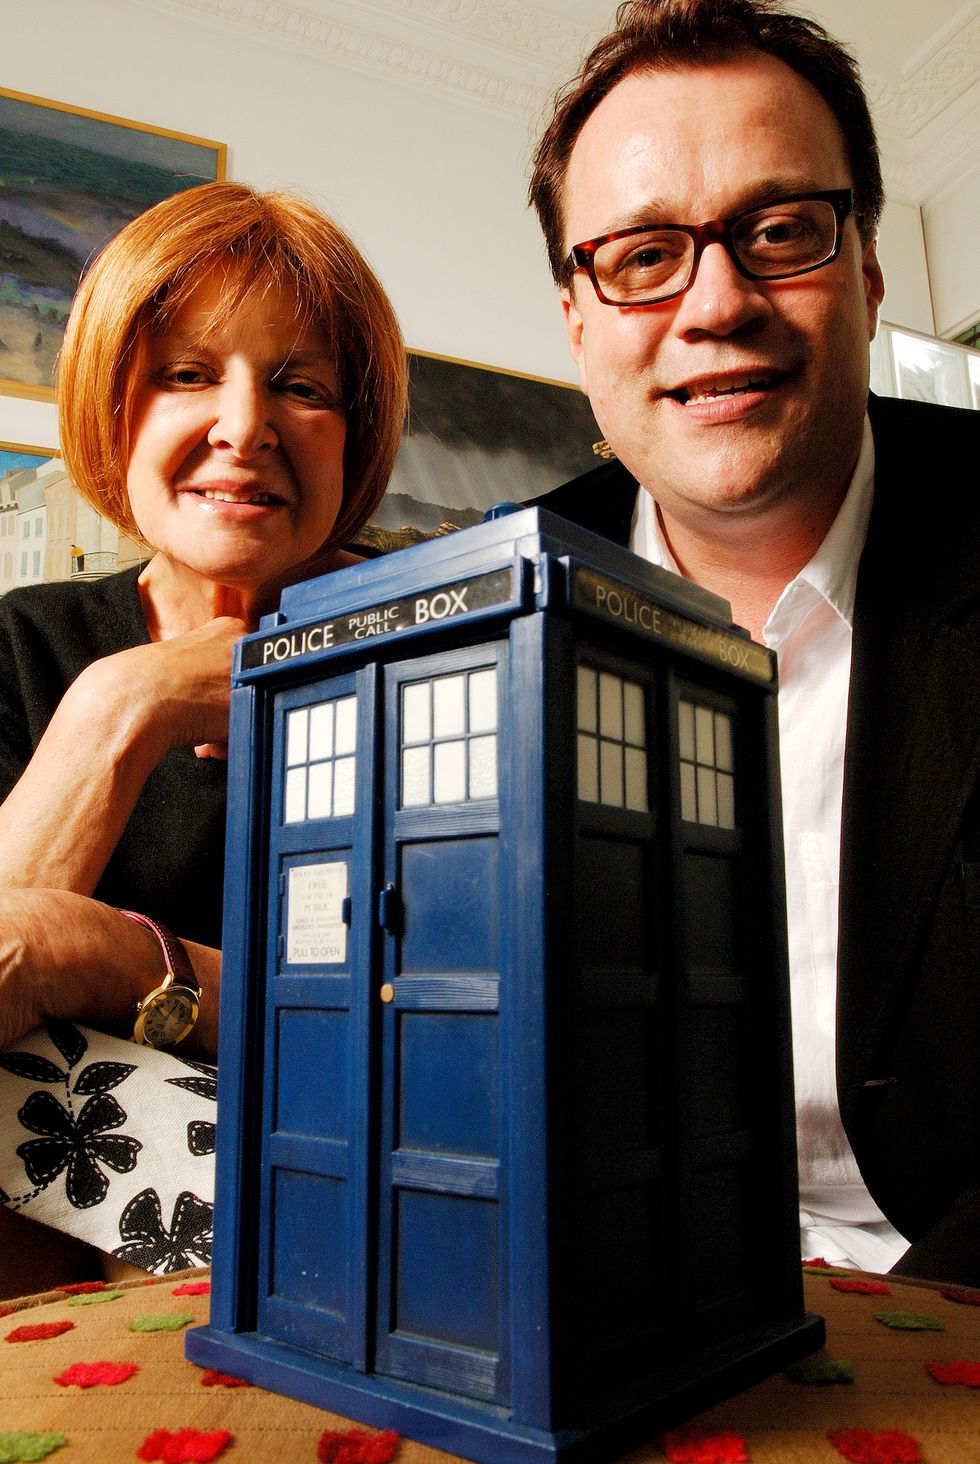 london, united kingdom   september 1 portrait of english television producer verity lambert l and welsh screenwriter russell t davies, photographed in london on september 1, 2006 lambert was the original producer of the science fiction series doctor who, while davies relaunched the series in 2005 photo by andy shortsfx magazinefuture via getty images